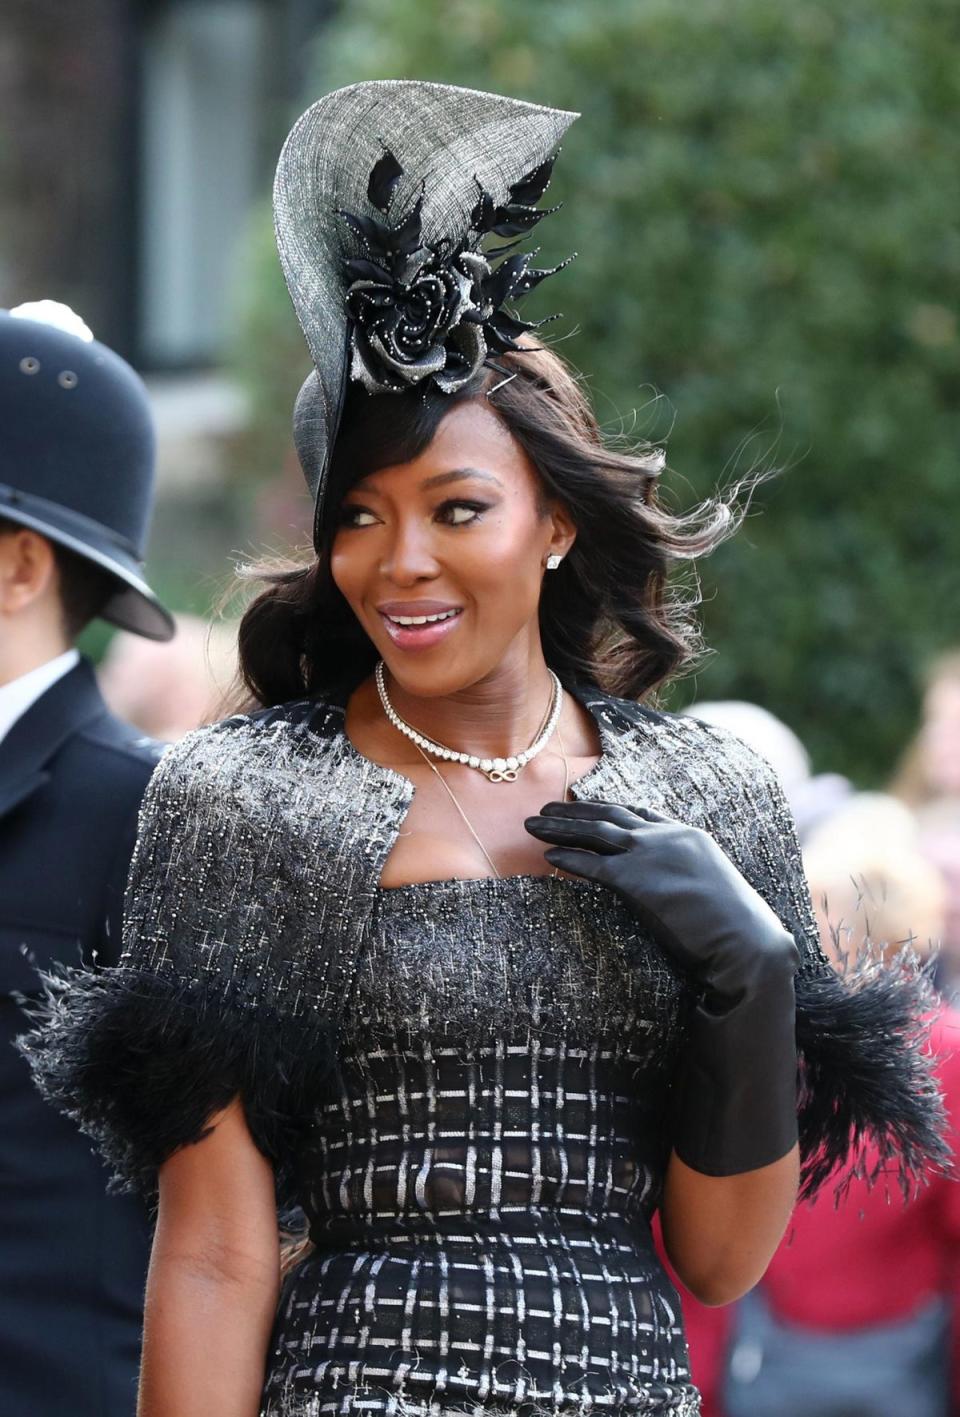 Naomi Campbell arrives at the wedding of Princess Eugenie of York and Mr. Jack Brooksbank at St. George's Chapel in 2018 (Getty Images)